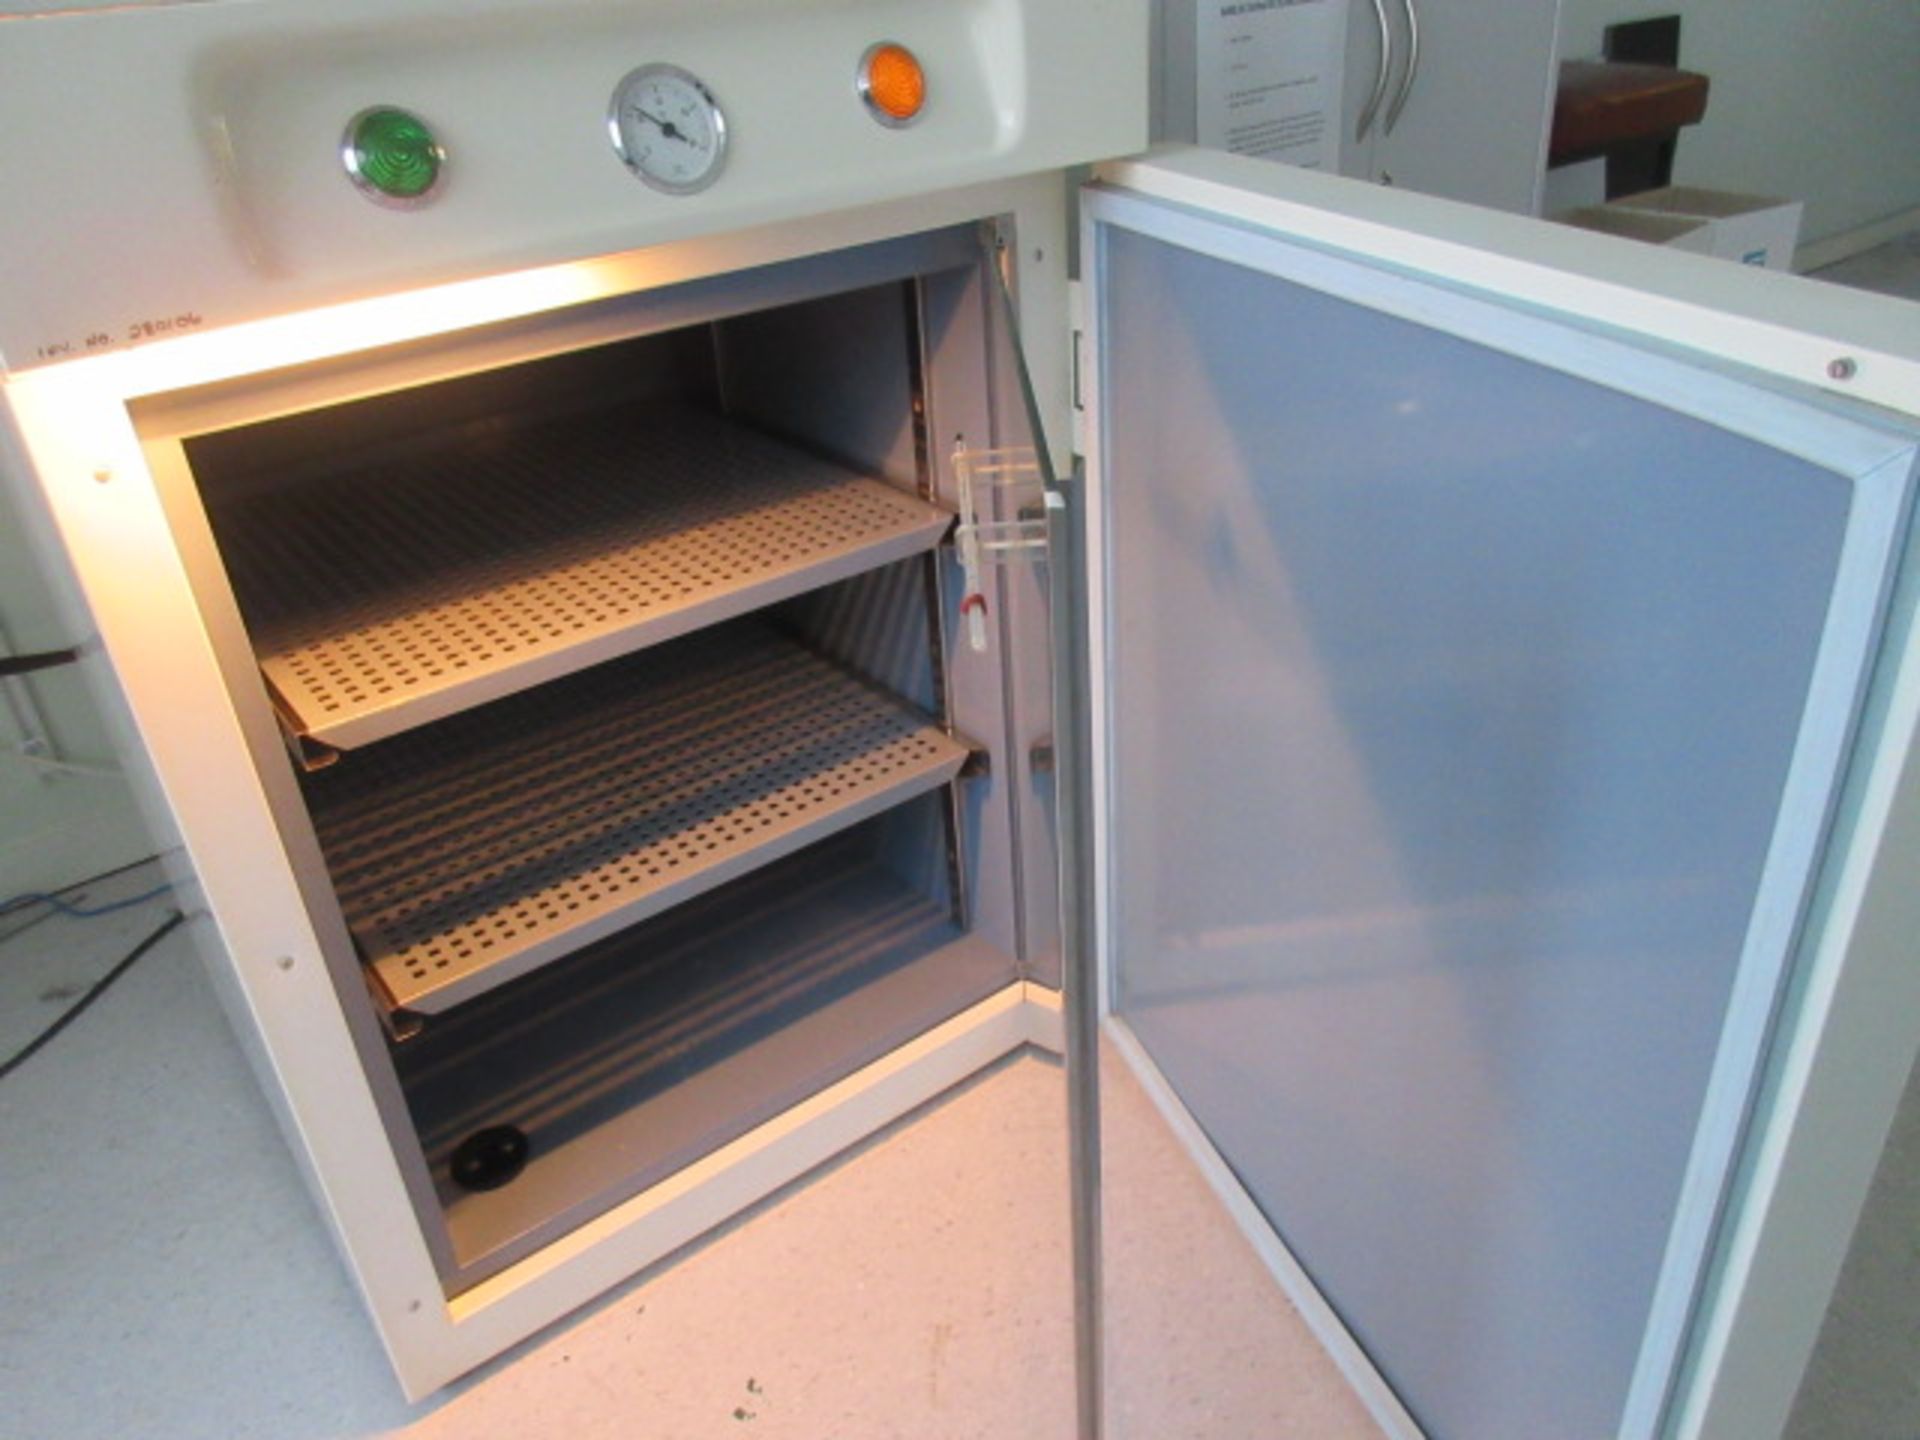 LABORATORY & ELECTRICAL ENG Co P2 ELECTRIC OVEN 480mm WIDE x 480mm DEEP x 600mm HIGH 240V - Bild 2 aus 3